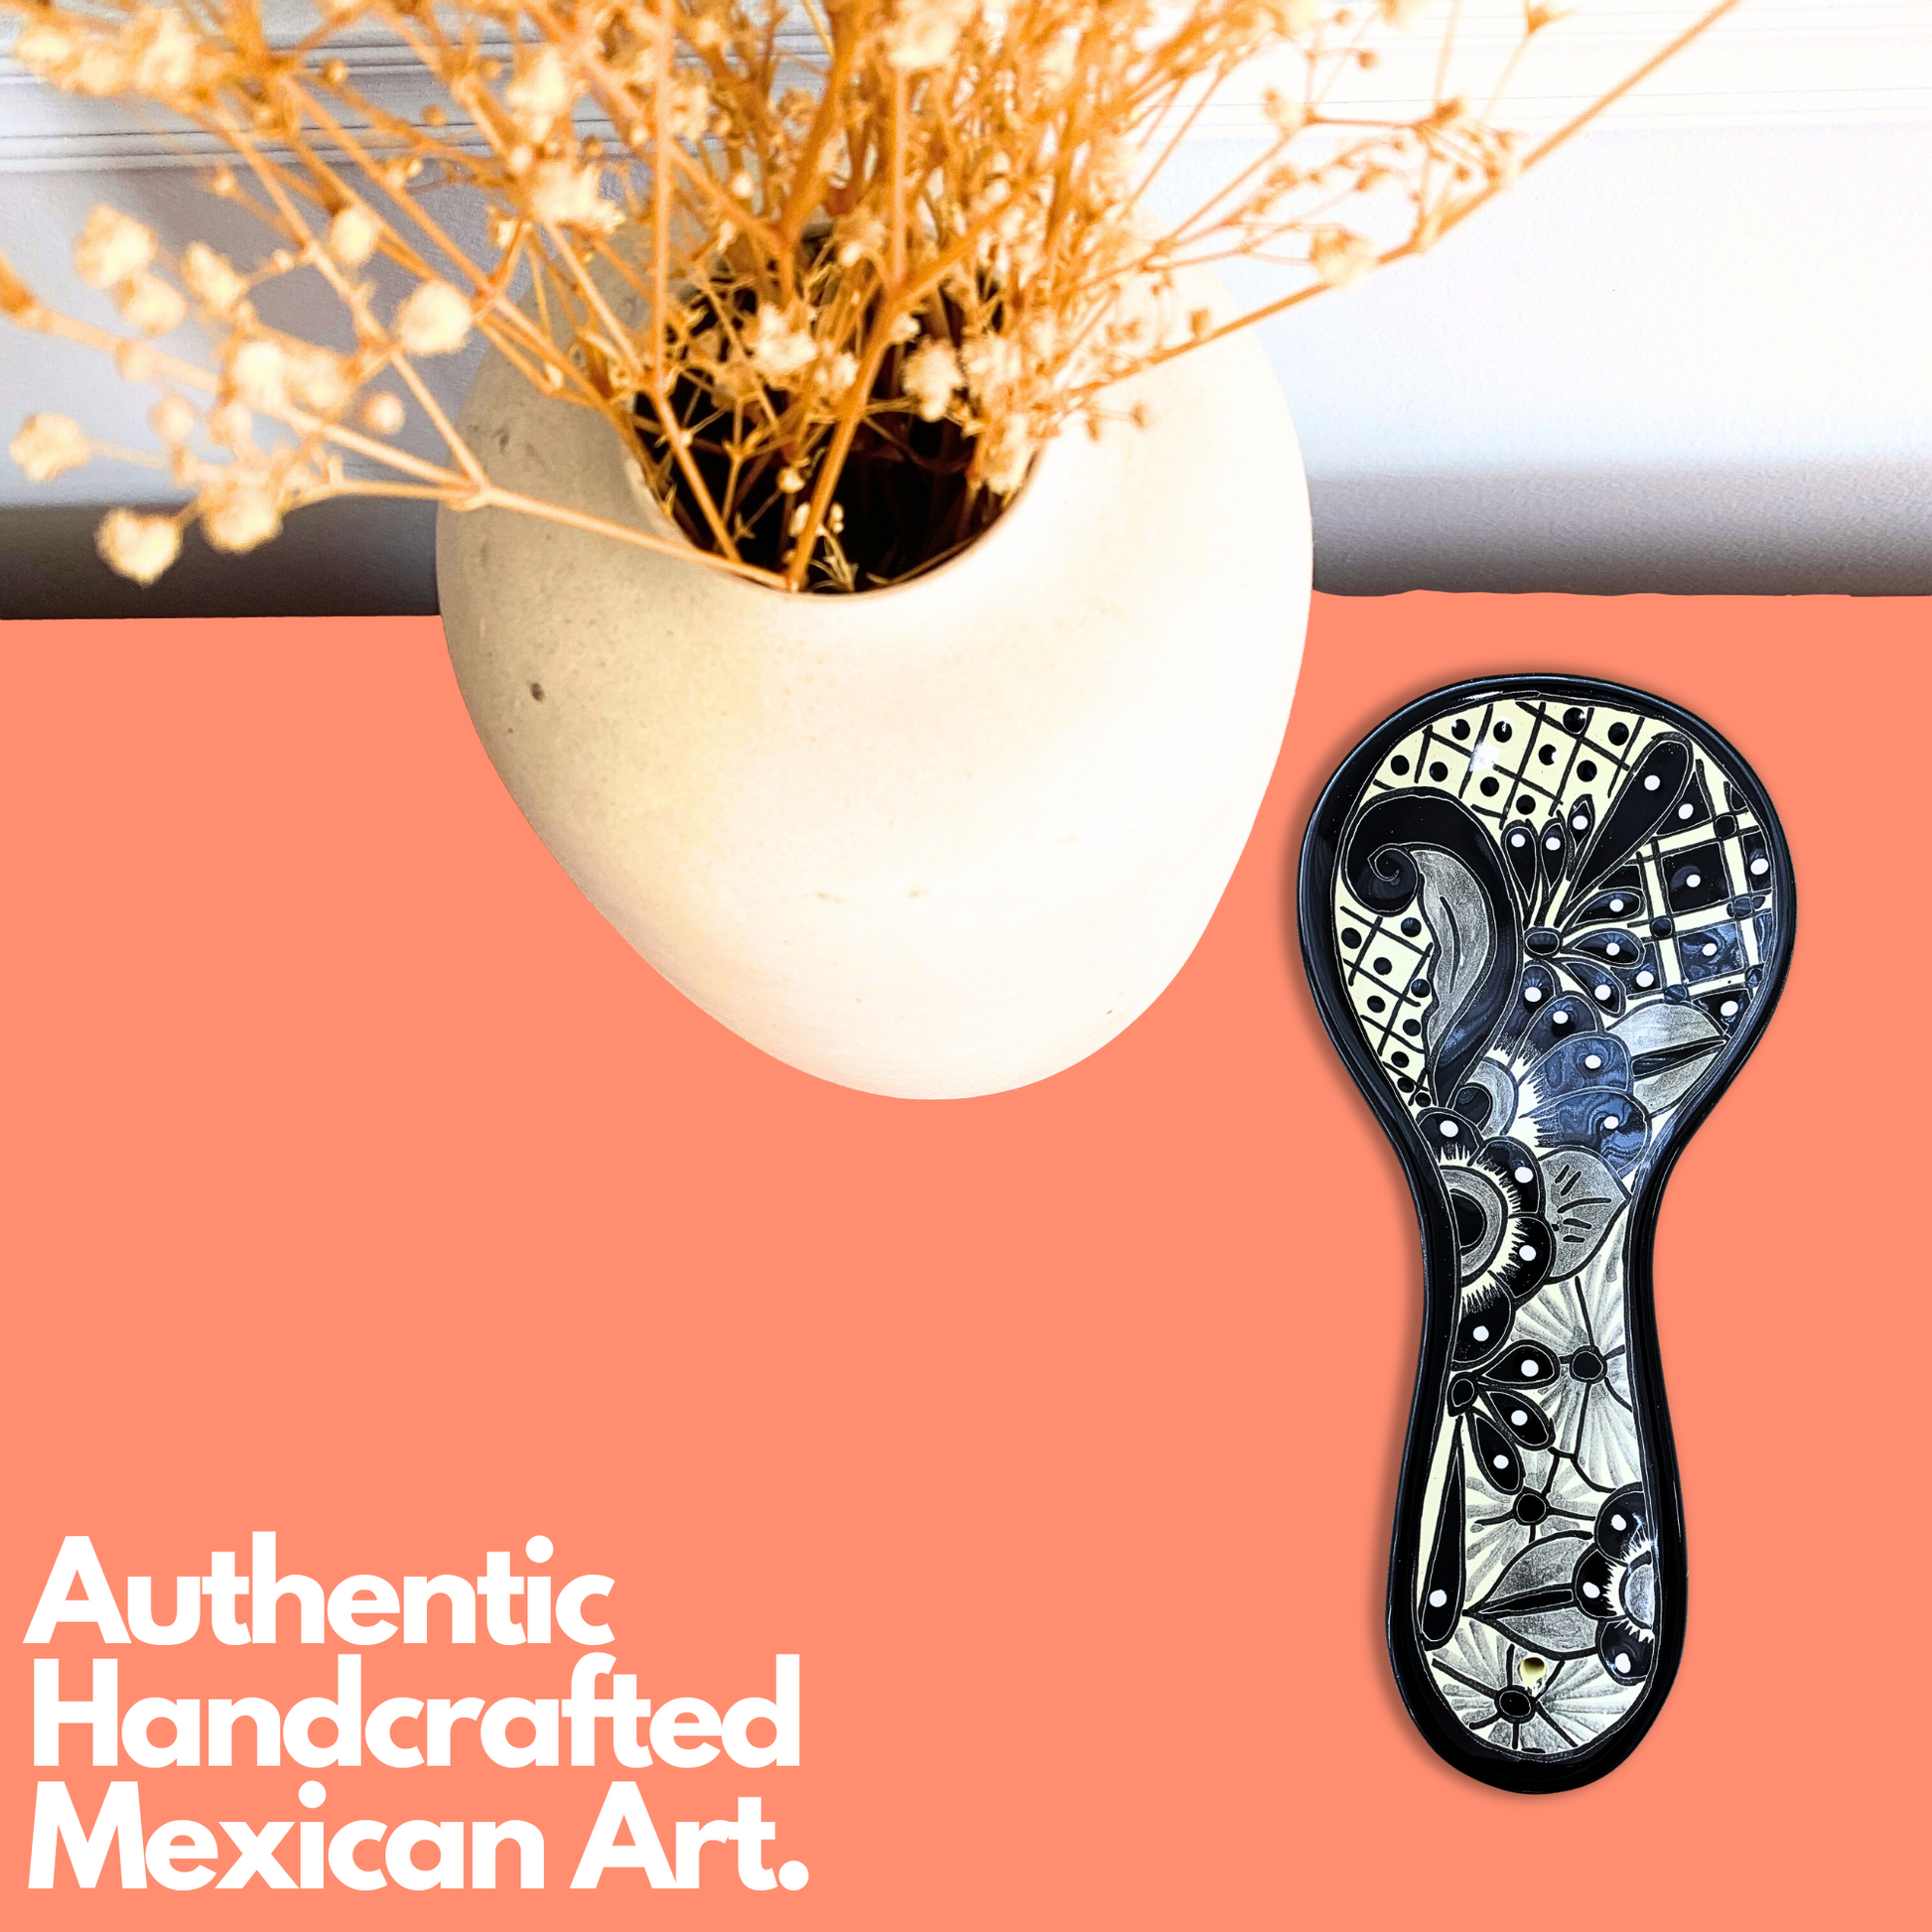 Hand Painted Talavera Ceramic Spoon Rest, a Black and White Floral Blanco/Negro design for kitchen décor, made by Mexican artisans.